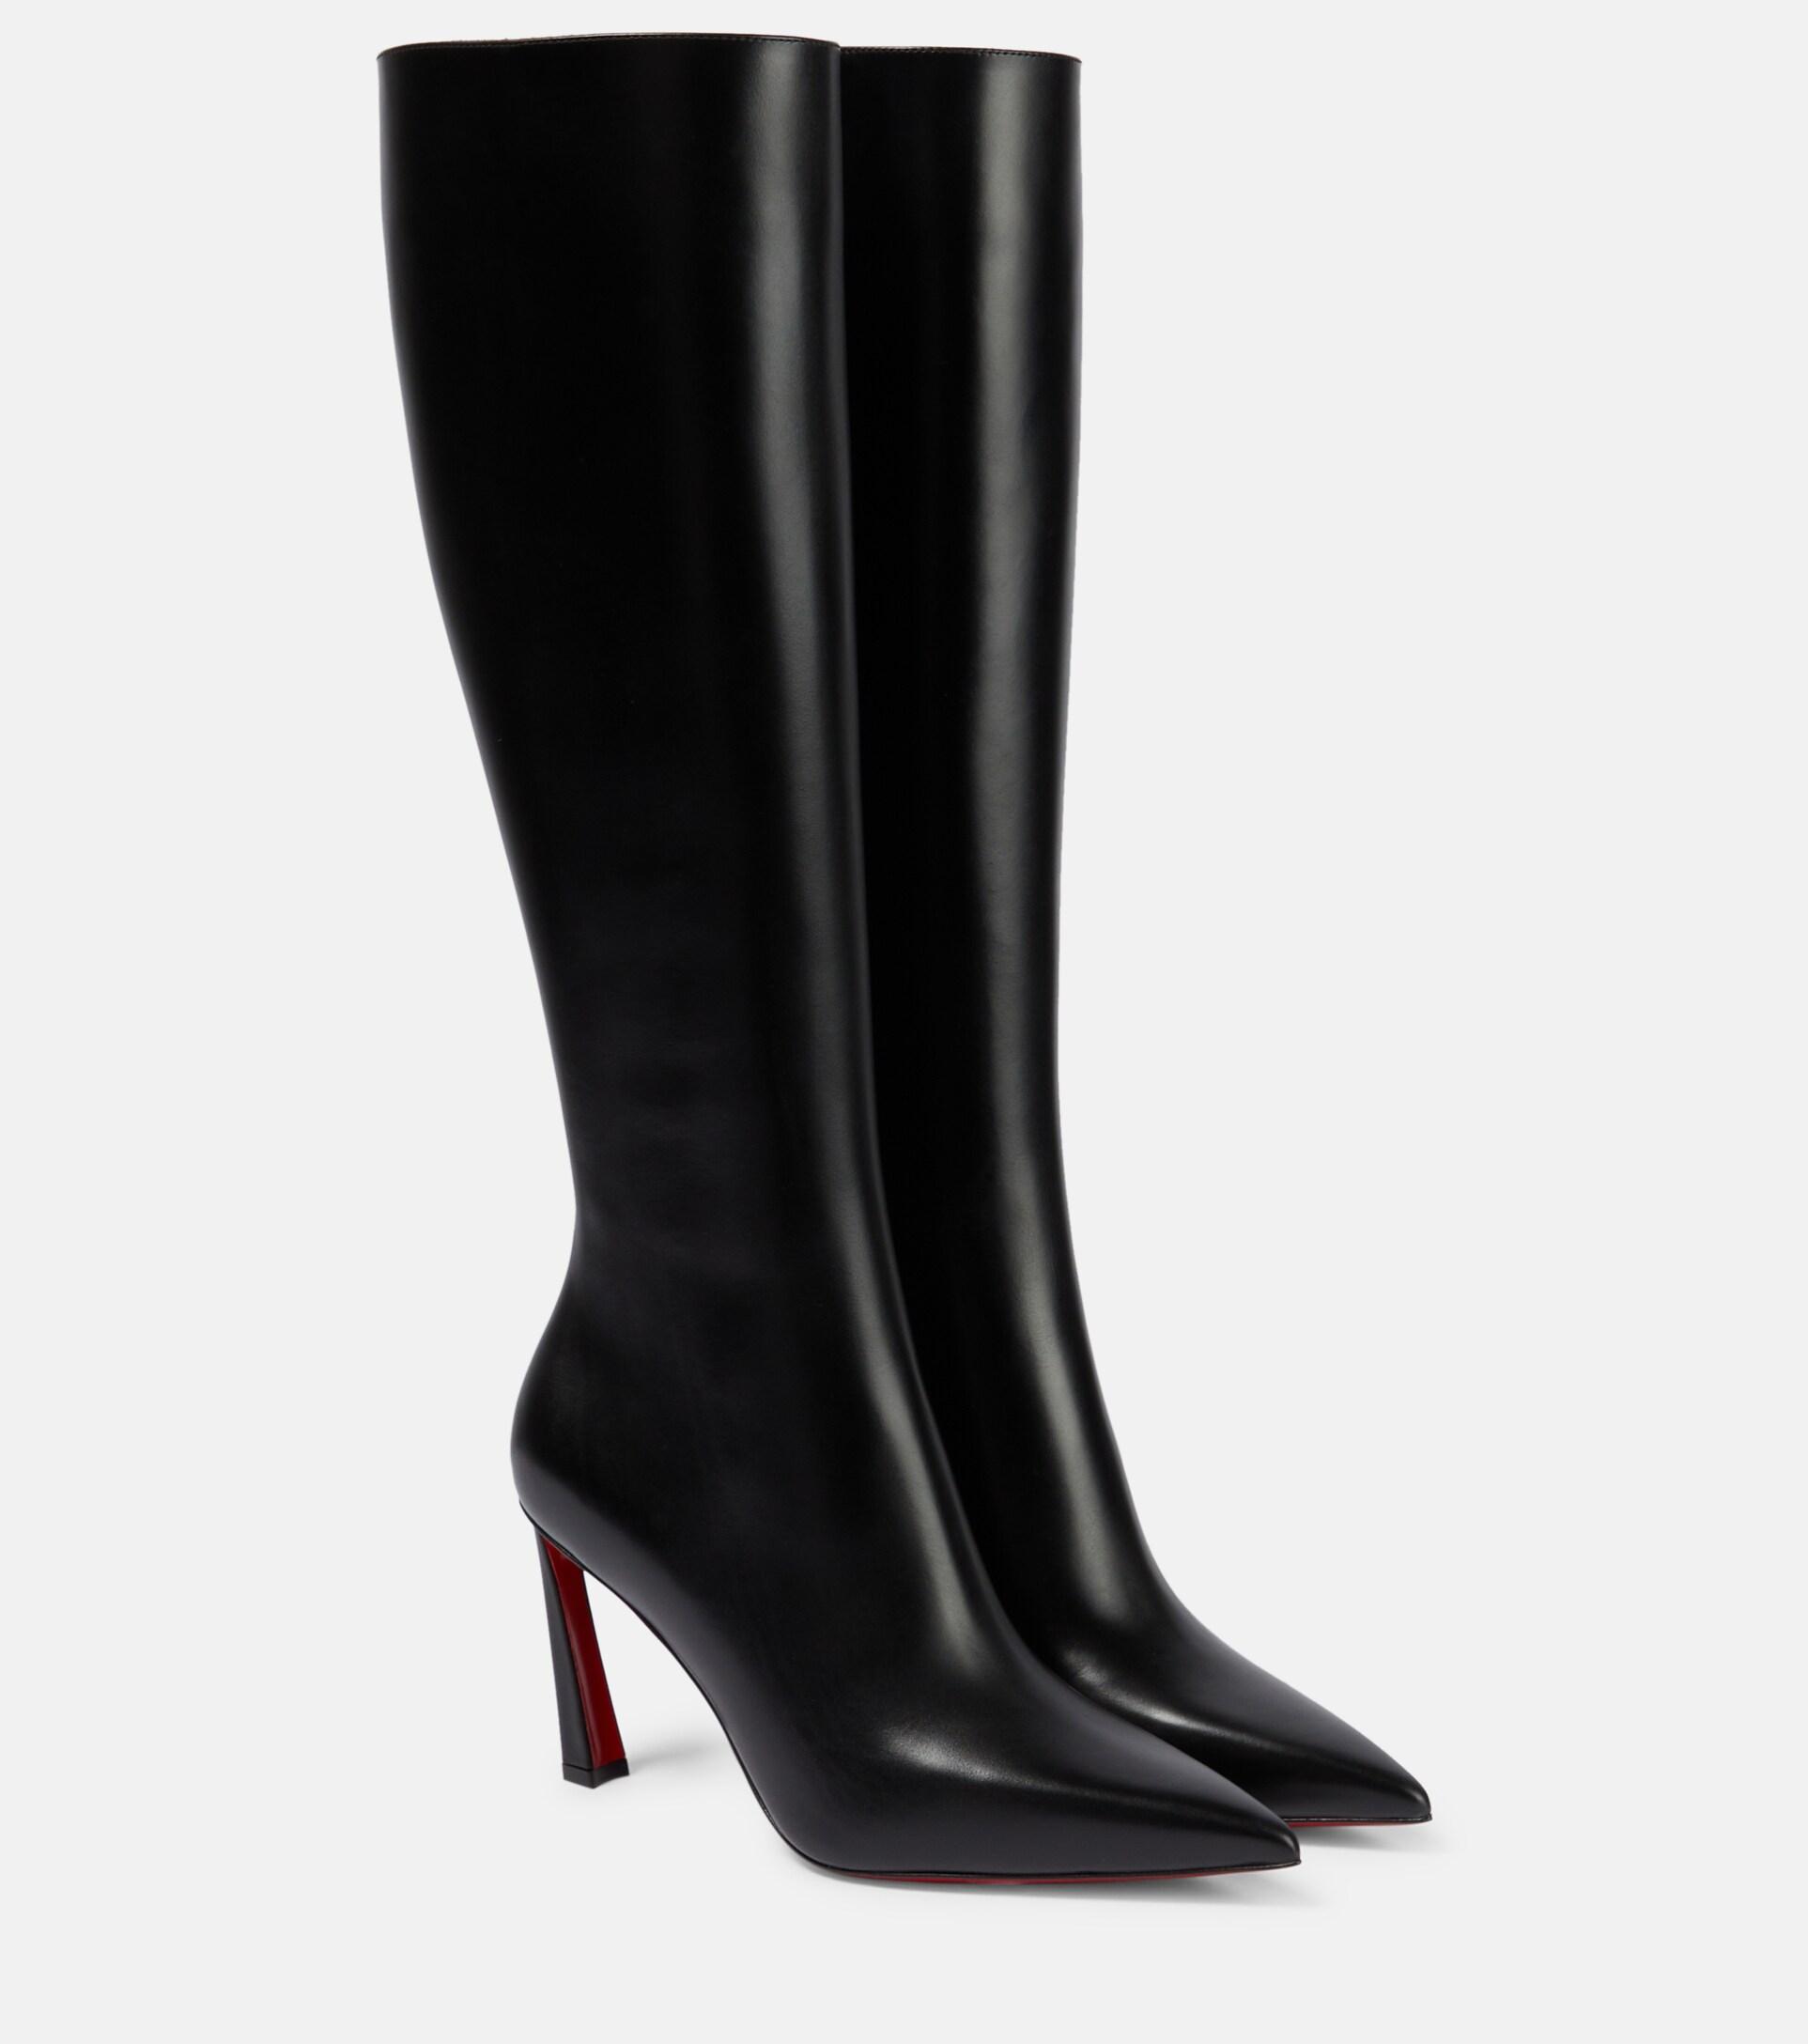 Christian Louboutin Condora Botta 85 Suede Knee-high Boots in Black | Lyst